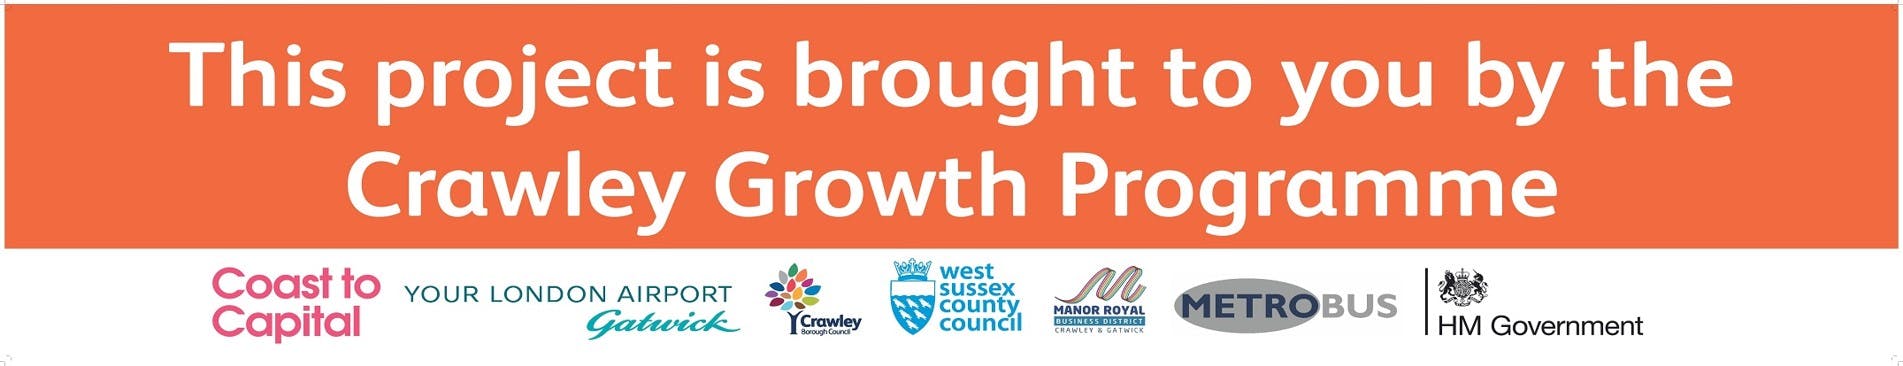 This project is brought to you by the Crawley Growth Programme.